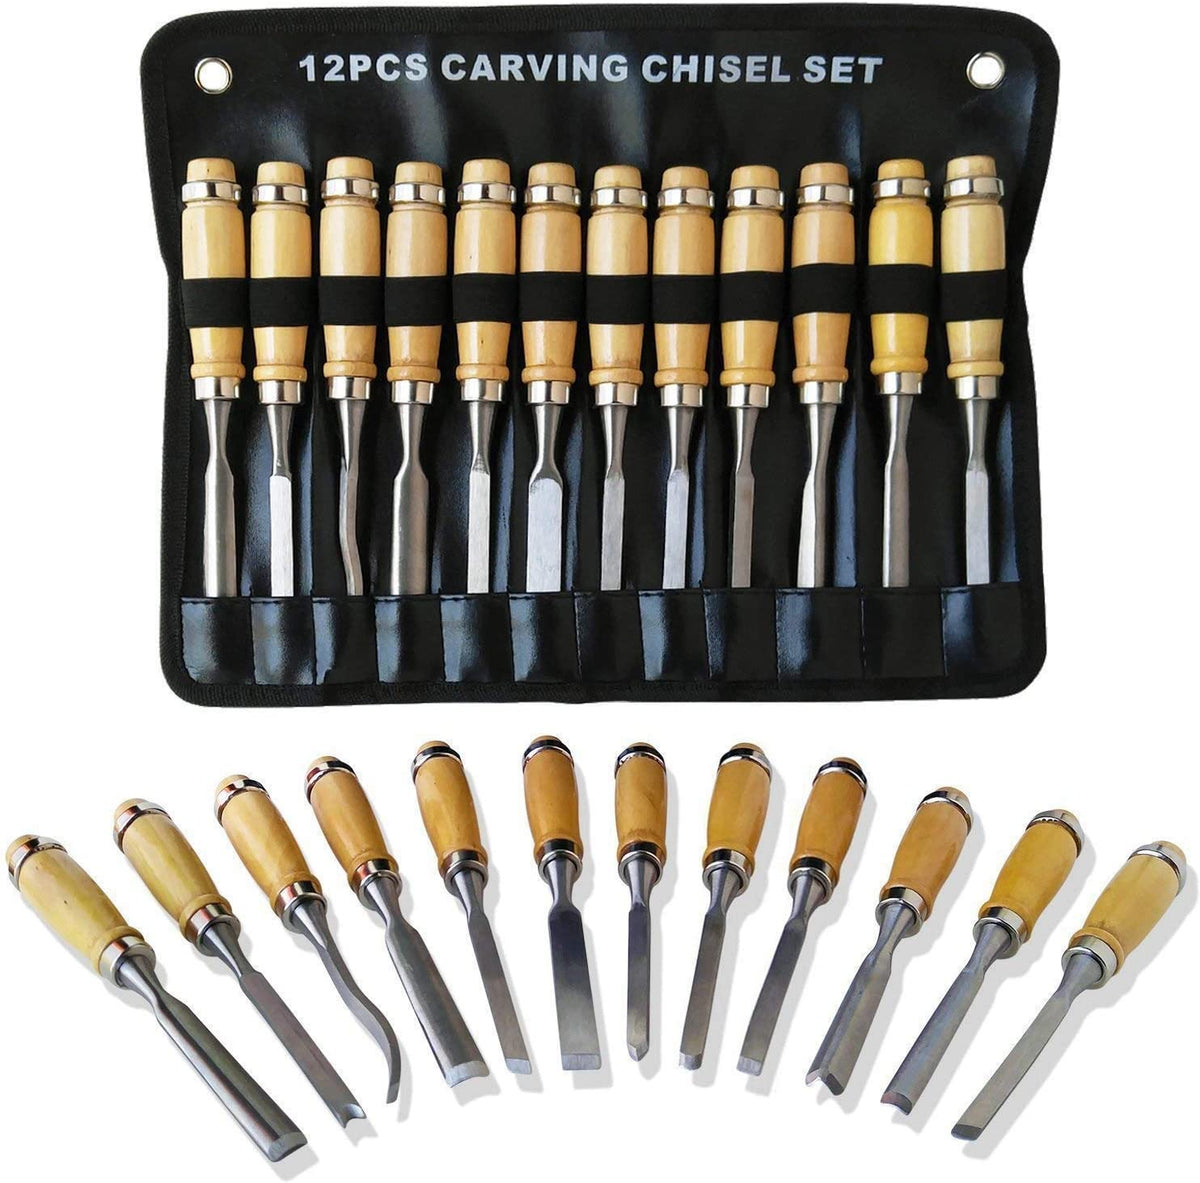 12 pcs Wood Chisel Tool Set, Woodworking Chisels Wood Carving Tools Trimming Down Wood Woodworking Lathe Gouges Tools with Roll-Up Carrying Case for Carpenter Craftsman,6mm (1/4"), 12mm (1/2")